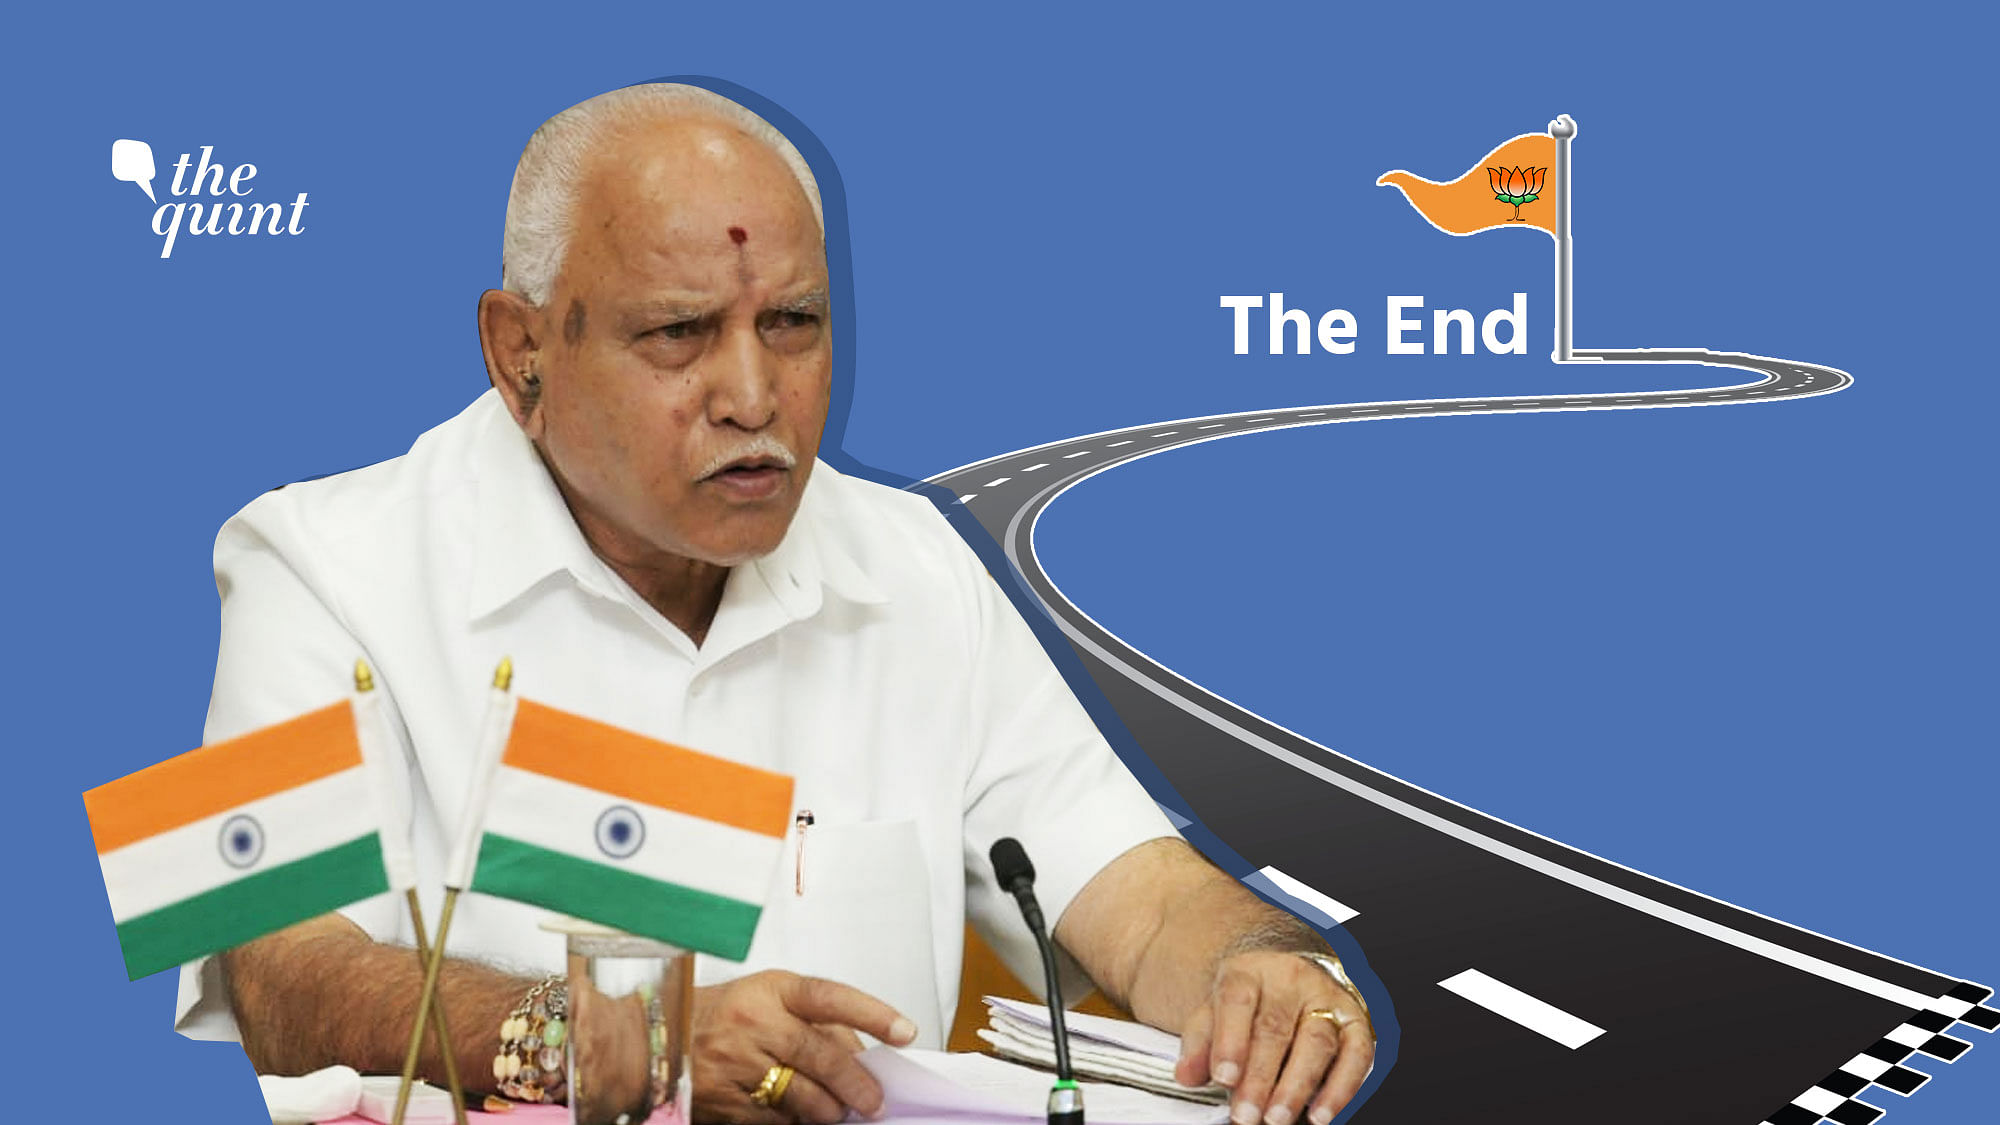 <div class="paragraphs"><p>Former Karnataka Chief Minister BS Yediyurappa who will turn 80 years of age this February said he has delivered his final speech in the Assembly on 22 February.</p></div>